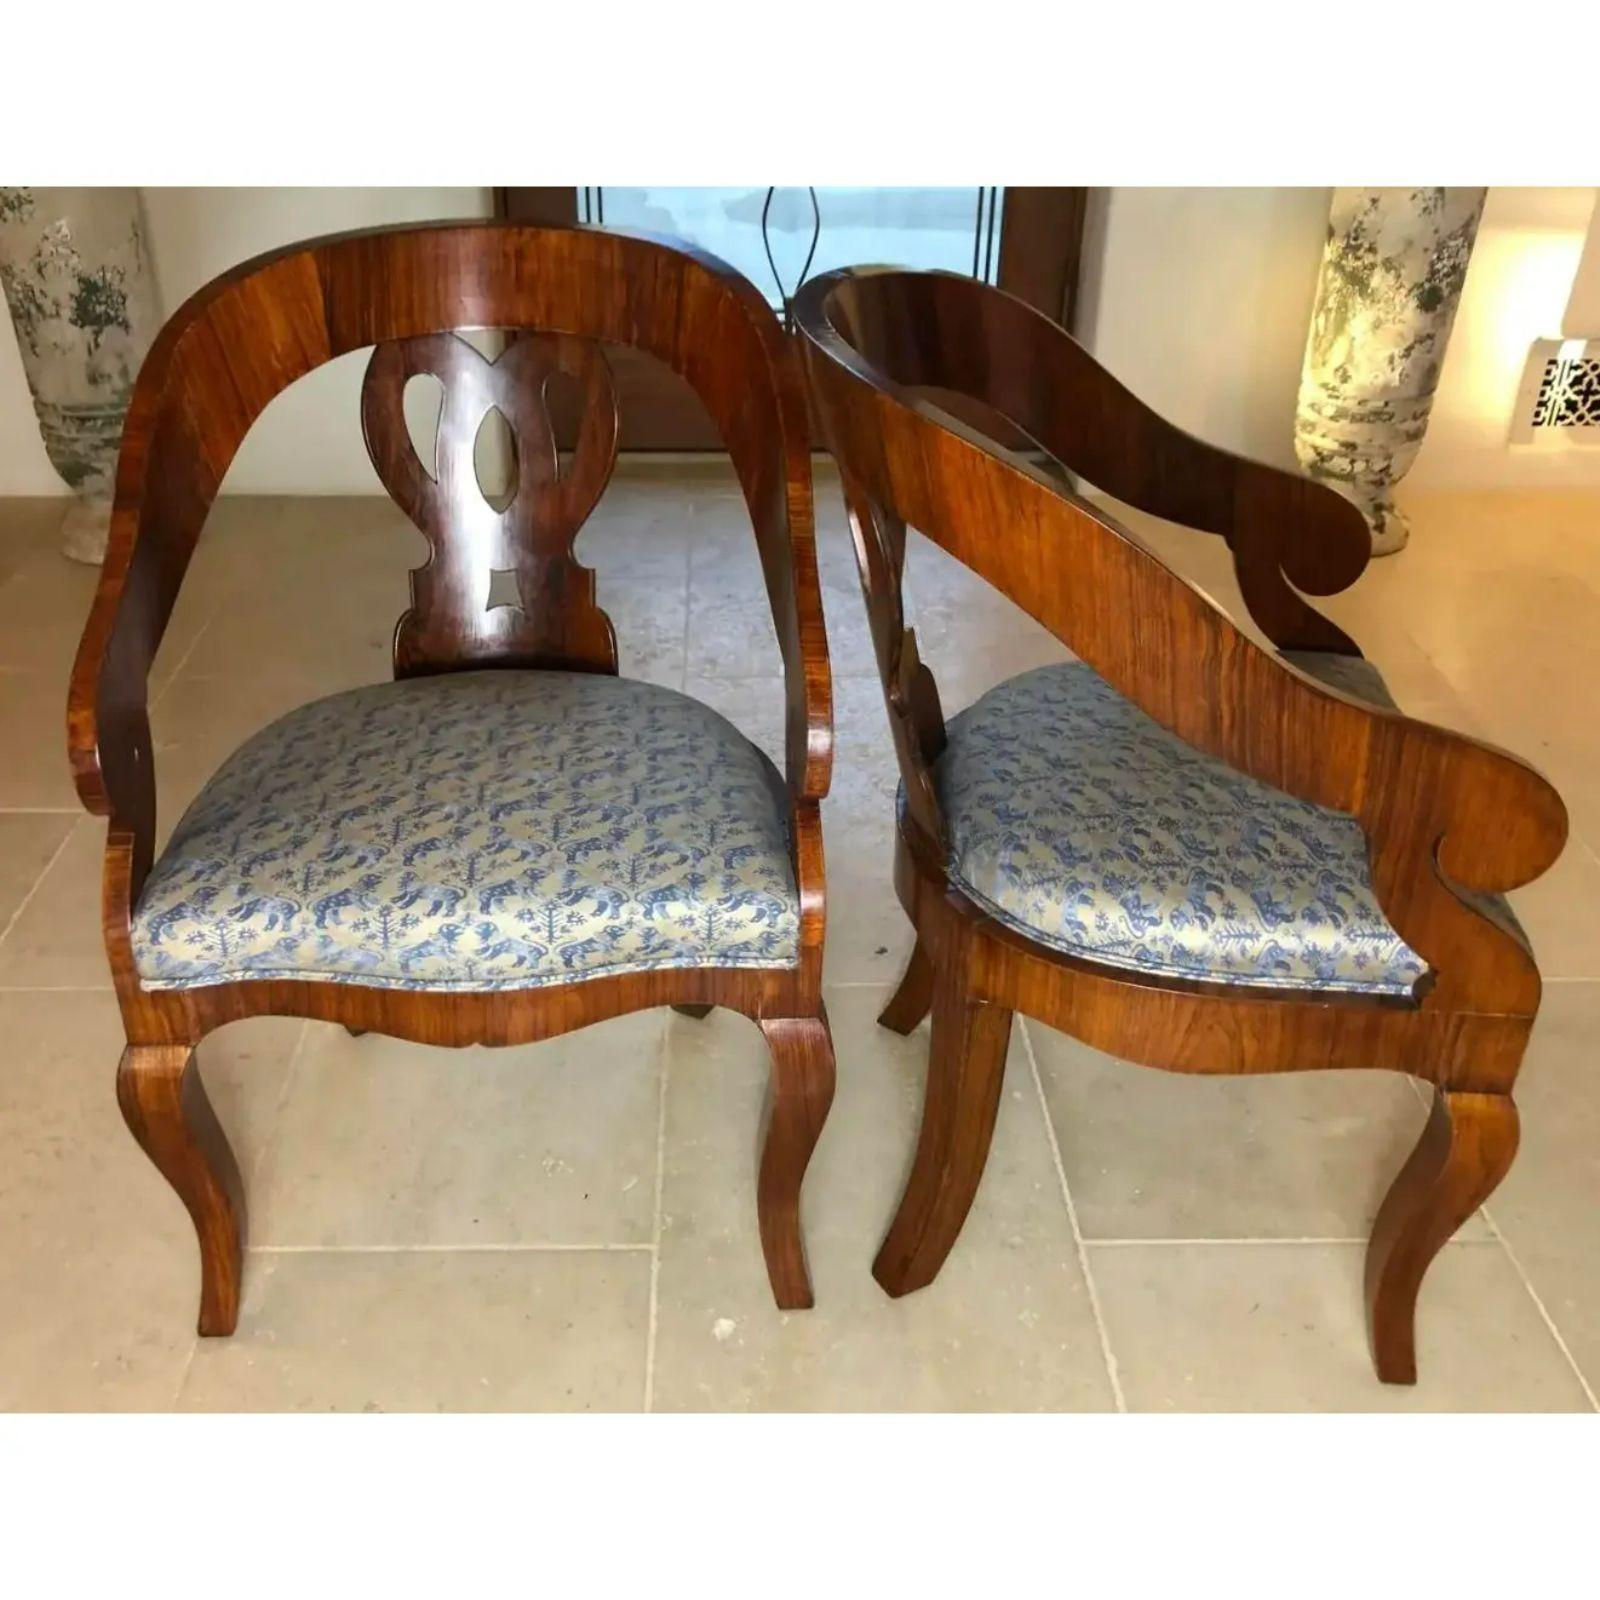 Pair of antique Biedermeier mahogany barrel chairs. Each upholstered in fine blue Fortuny fabric.

Additional information: 
Materials: Cotton, Mahogany
Please note that this item contains materials that are legally subject to a special export